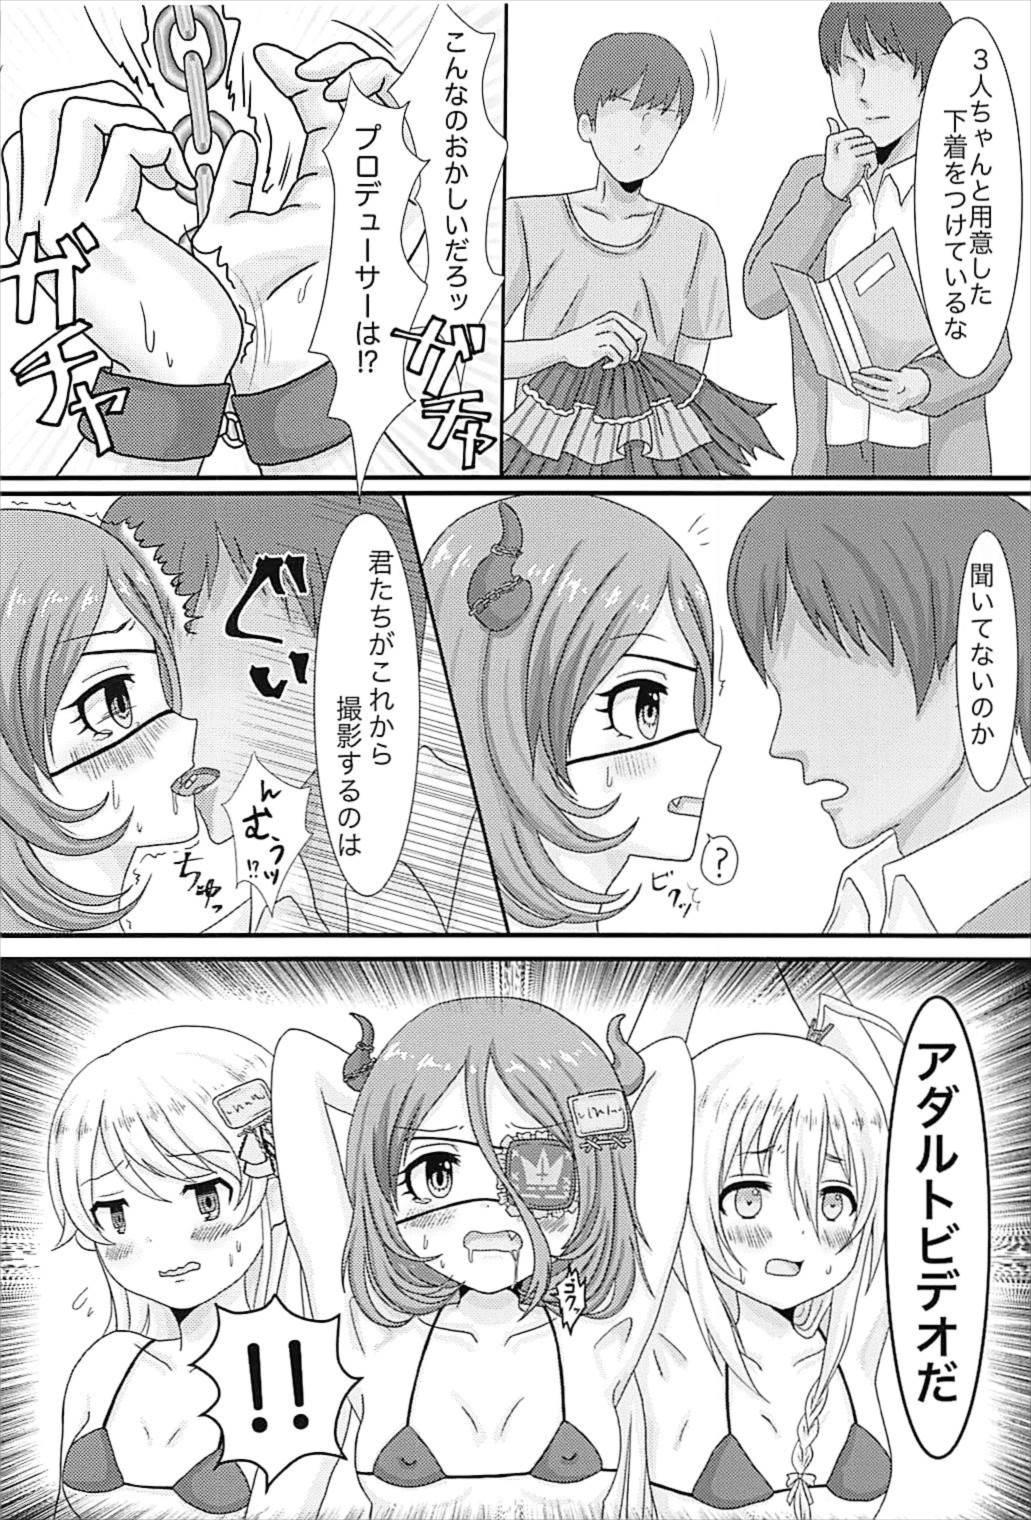 Old And Young individualsとエッチしたい！ - The idolmaster Cocksucking - Page 5